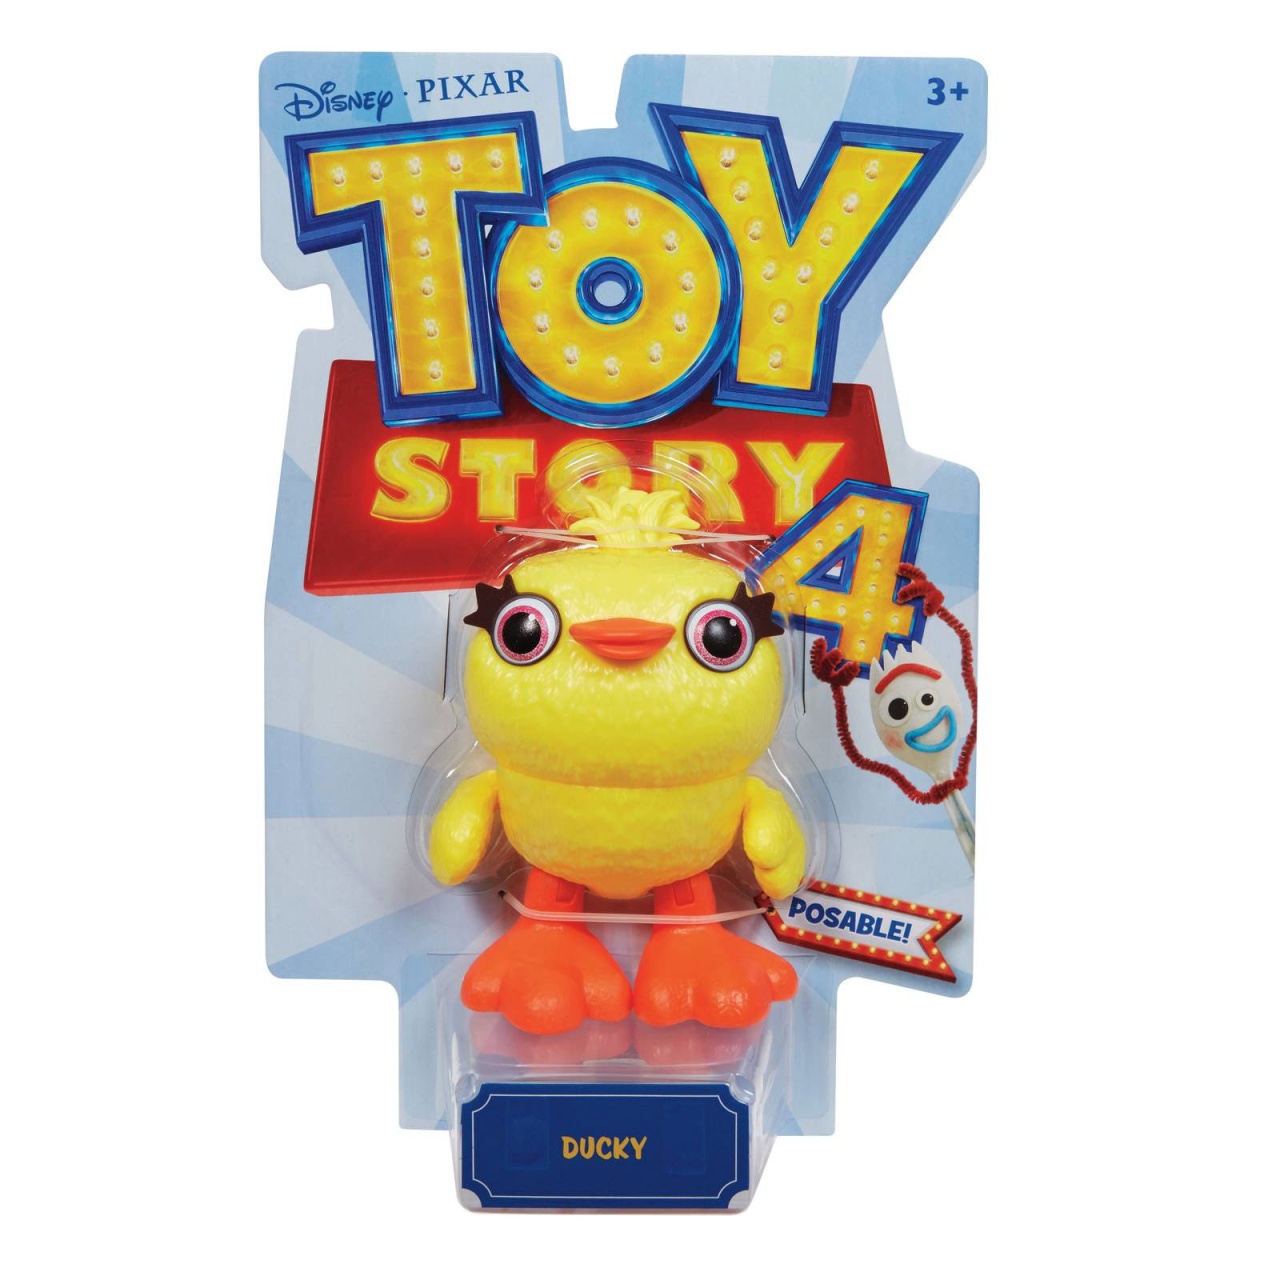 Toy Story 4 Basis Figur Ducky